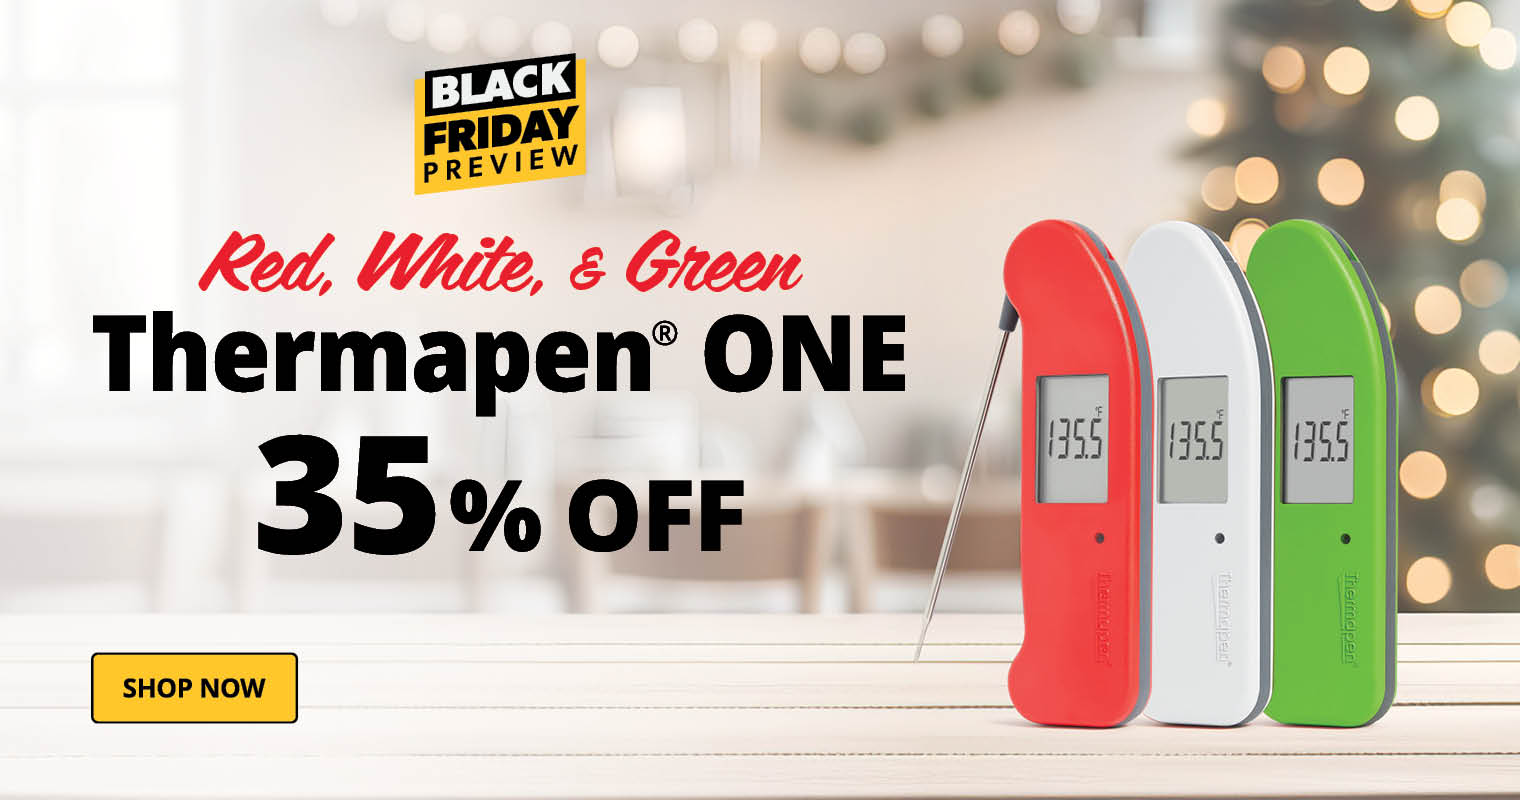 Black Friday Preview Flash Sale: ThermoWorks ChefAlarm Thermometer & Timer  – Save 40%! + Hands on Review